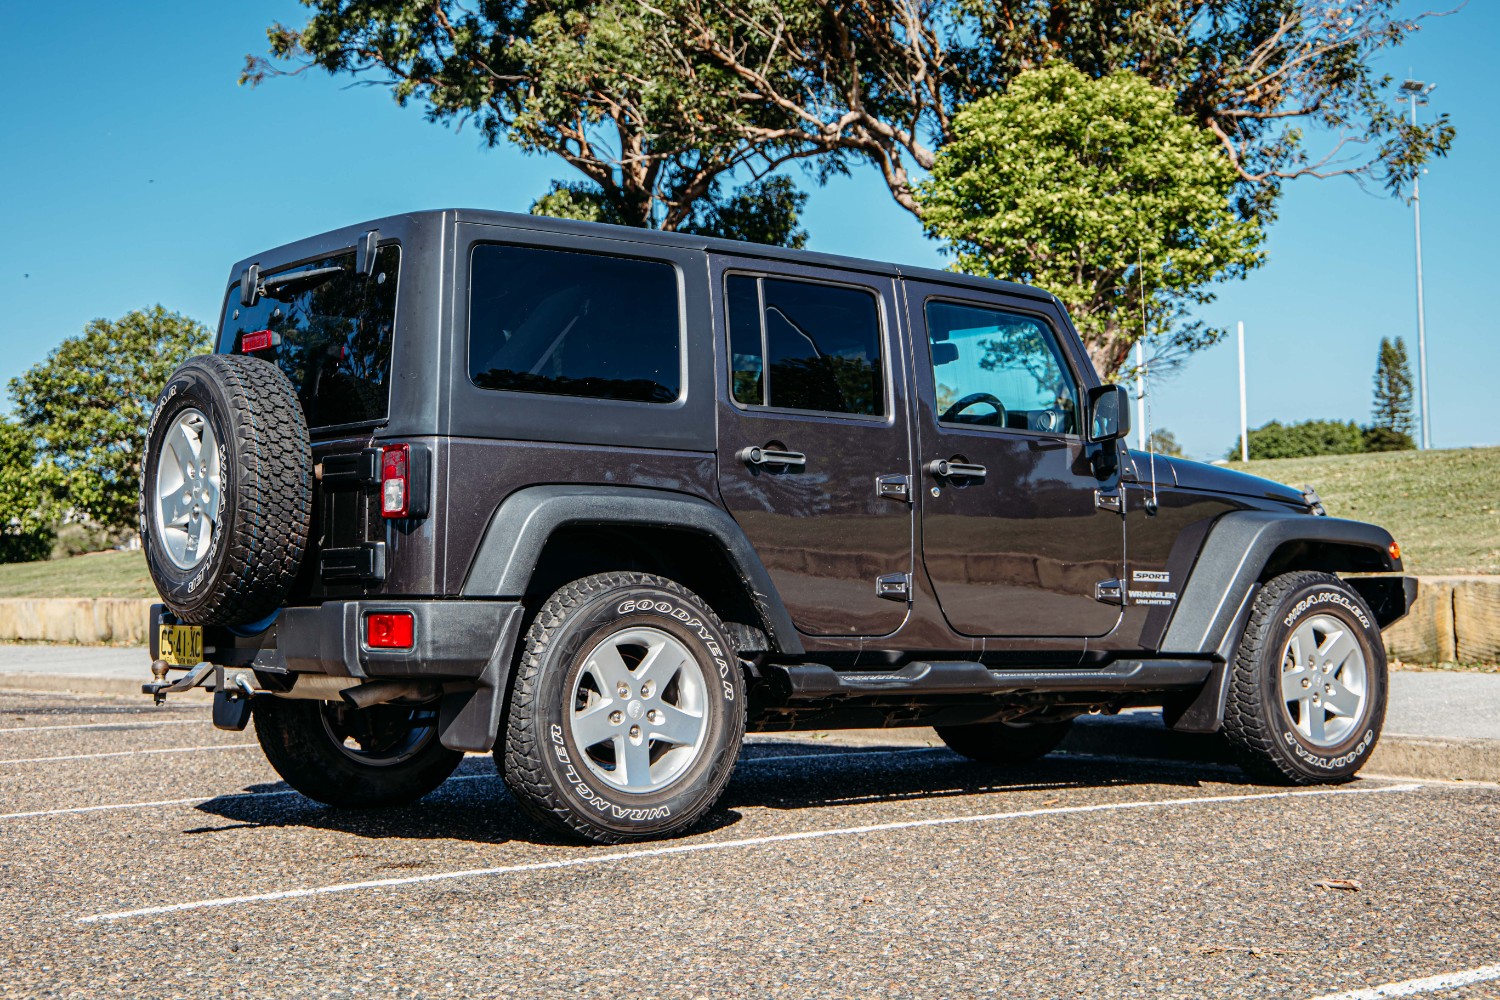 2014 Jeep Wrangler Unlimited - Sport Convertible Image 15